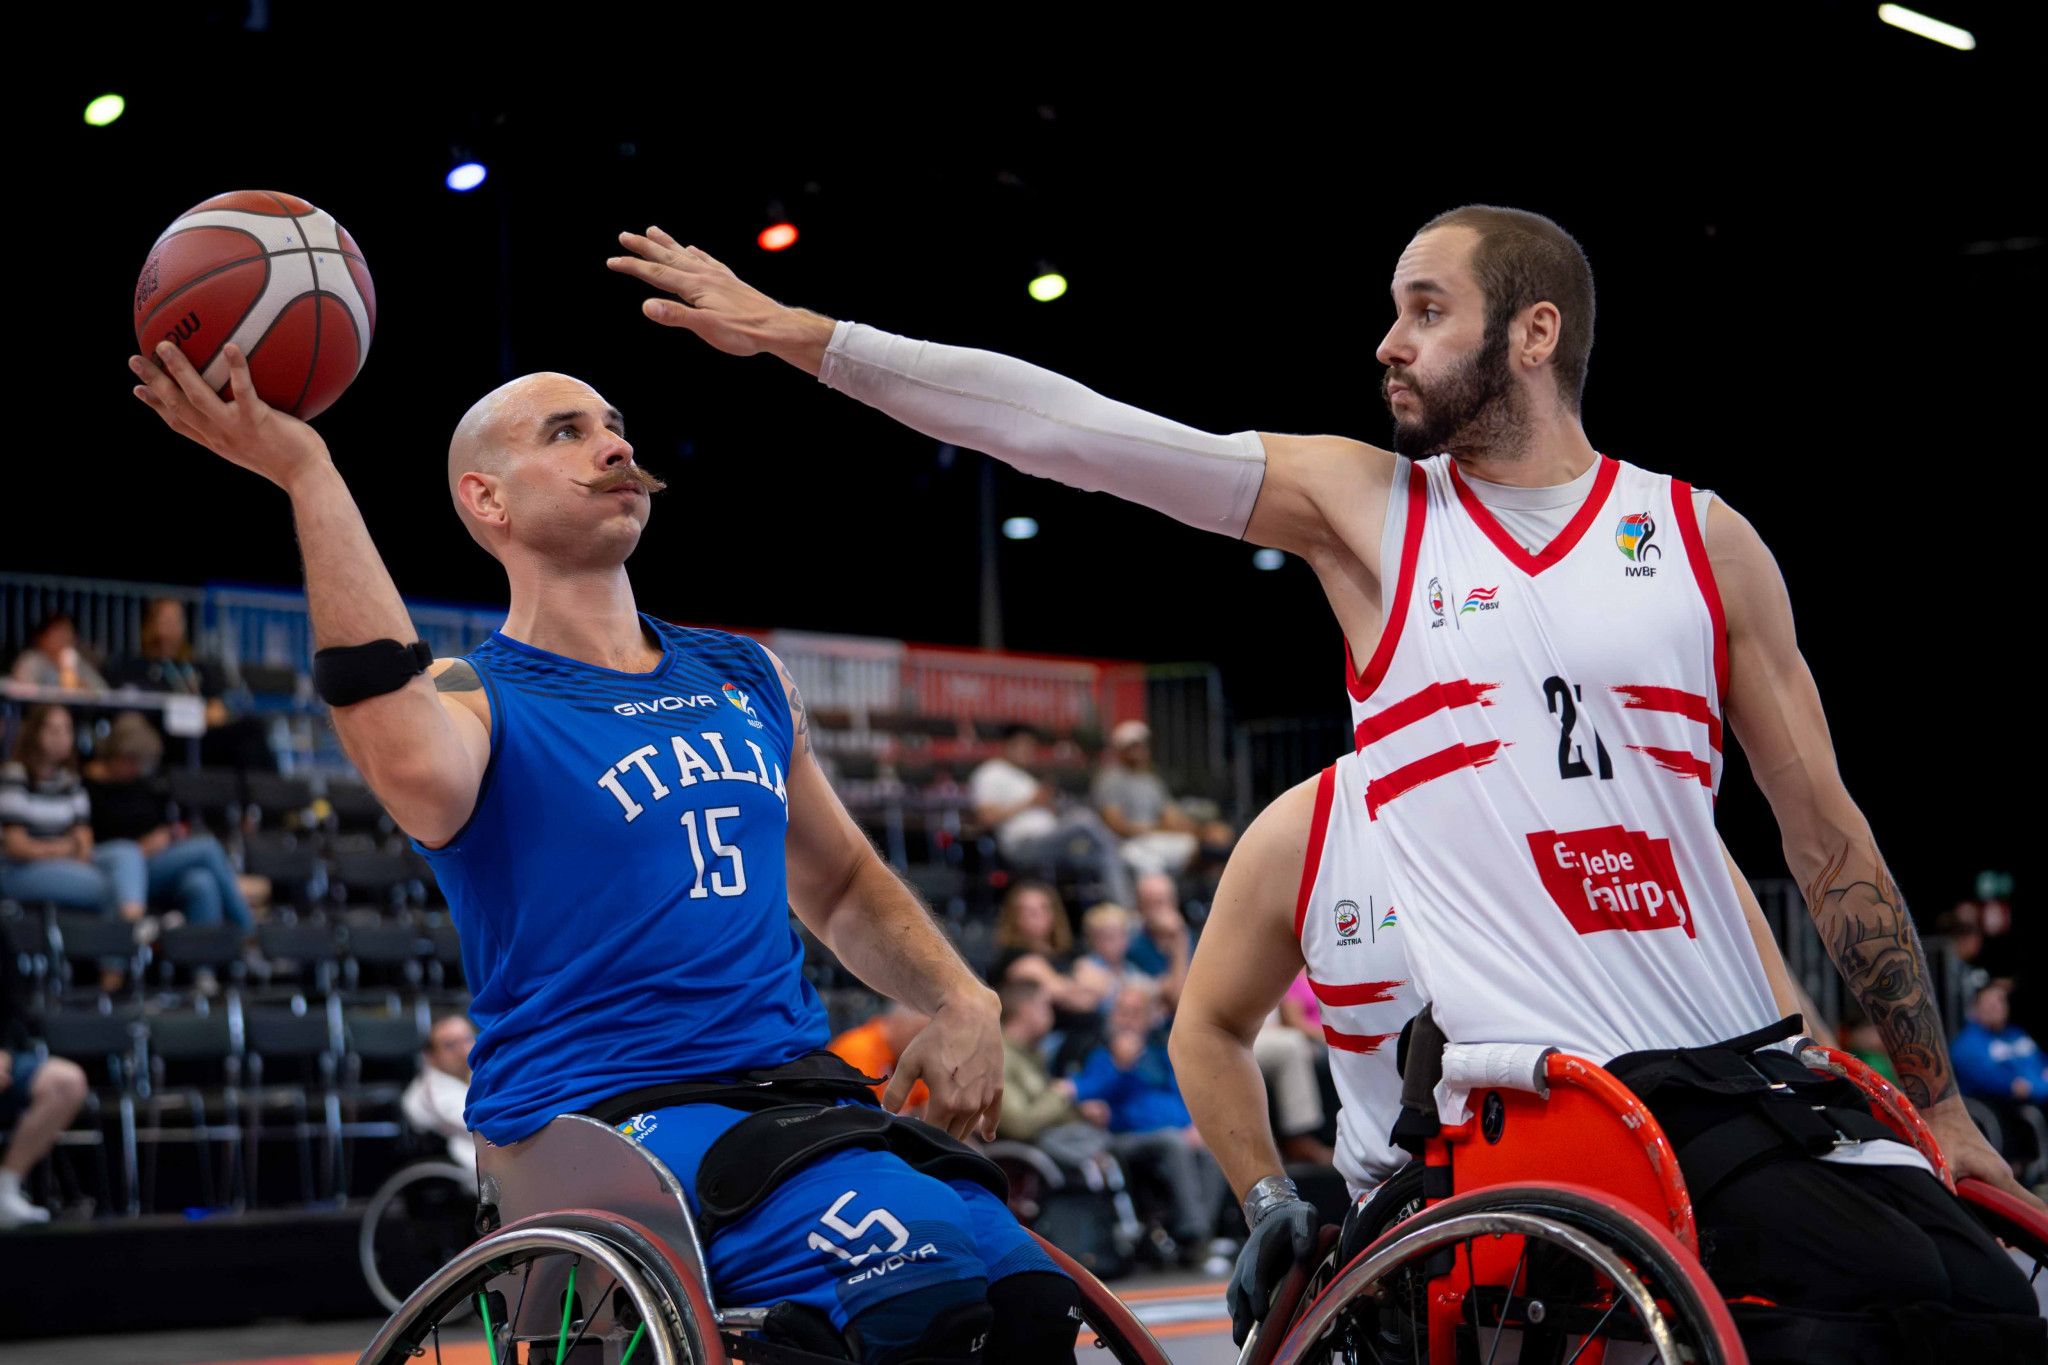 Italy powered to a 83-30 victory over Austria in the pool stages of the men's wheelchair basketball competition ©EPC